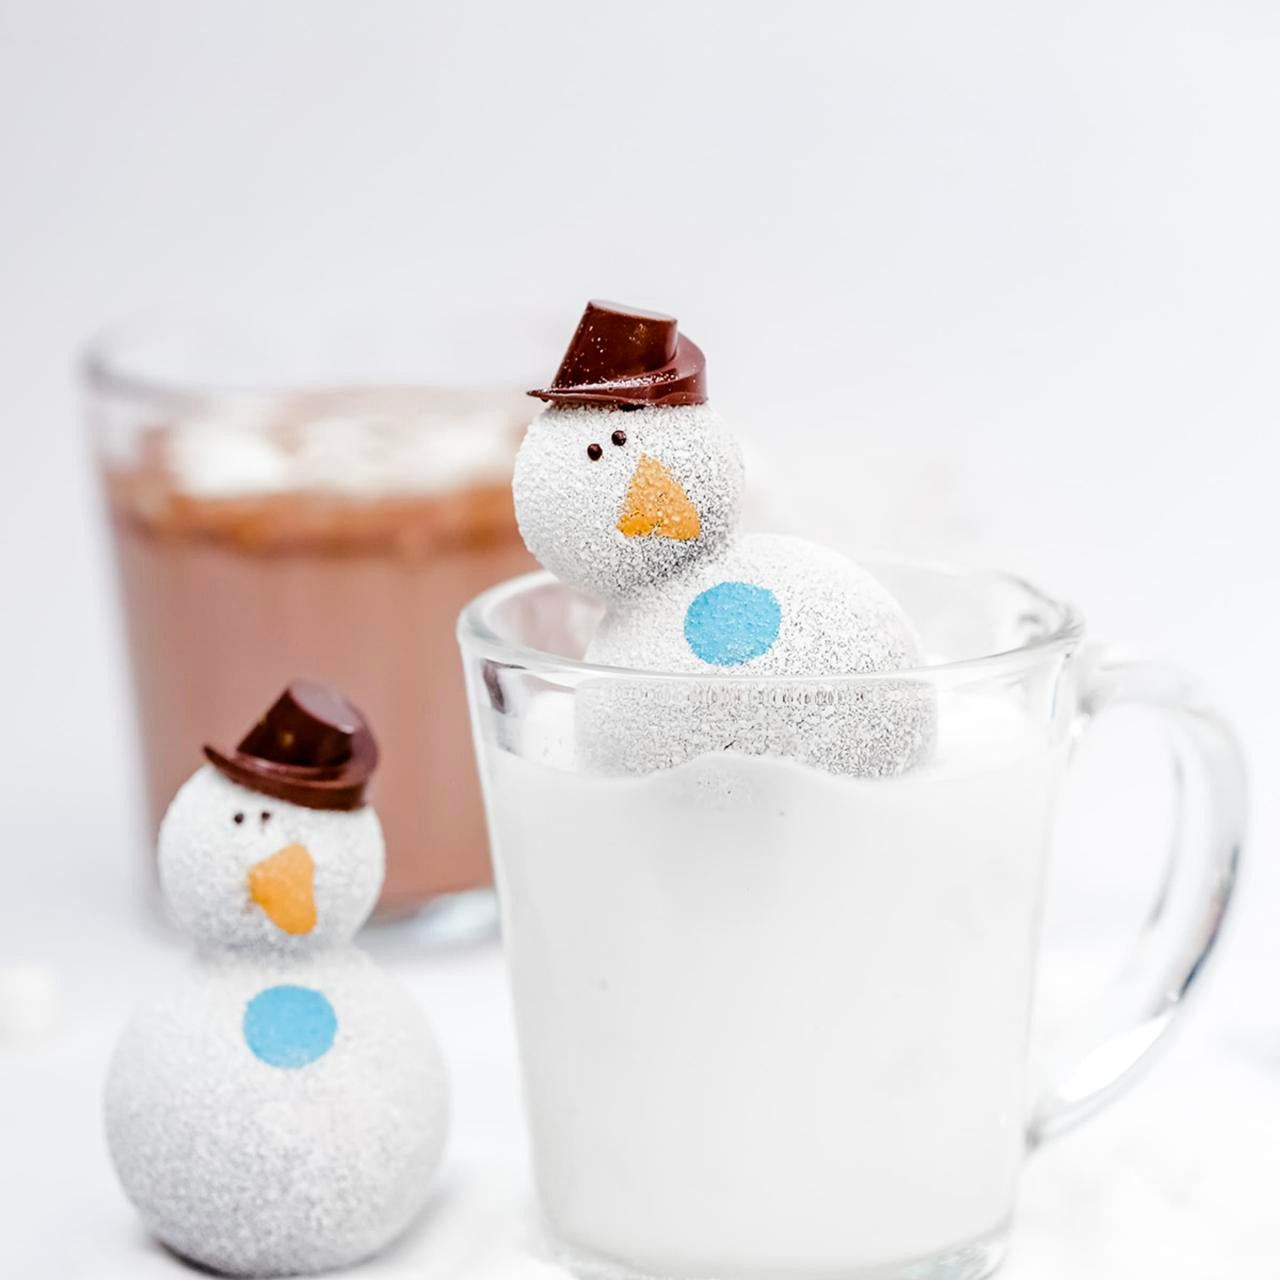 Carl - The Lil' Drinking Chocolate Snowman